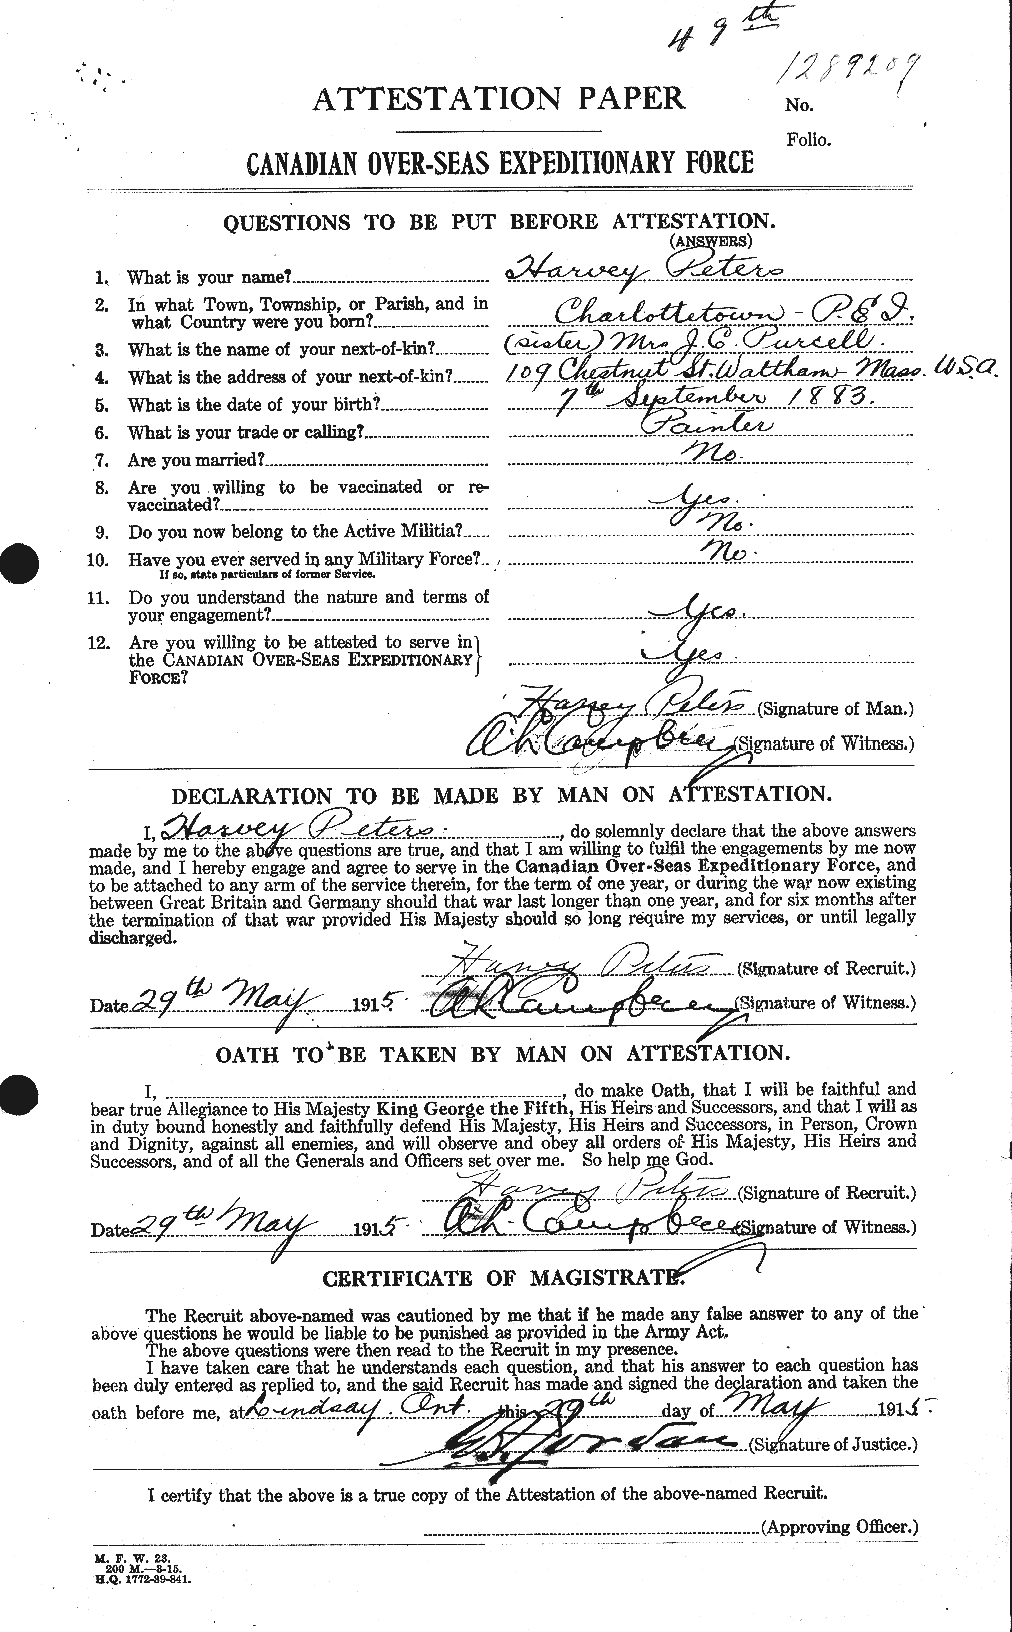 Personnel Records of the First World War - CEF 575482a